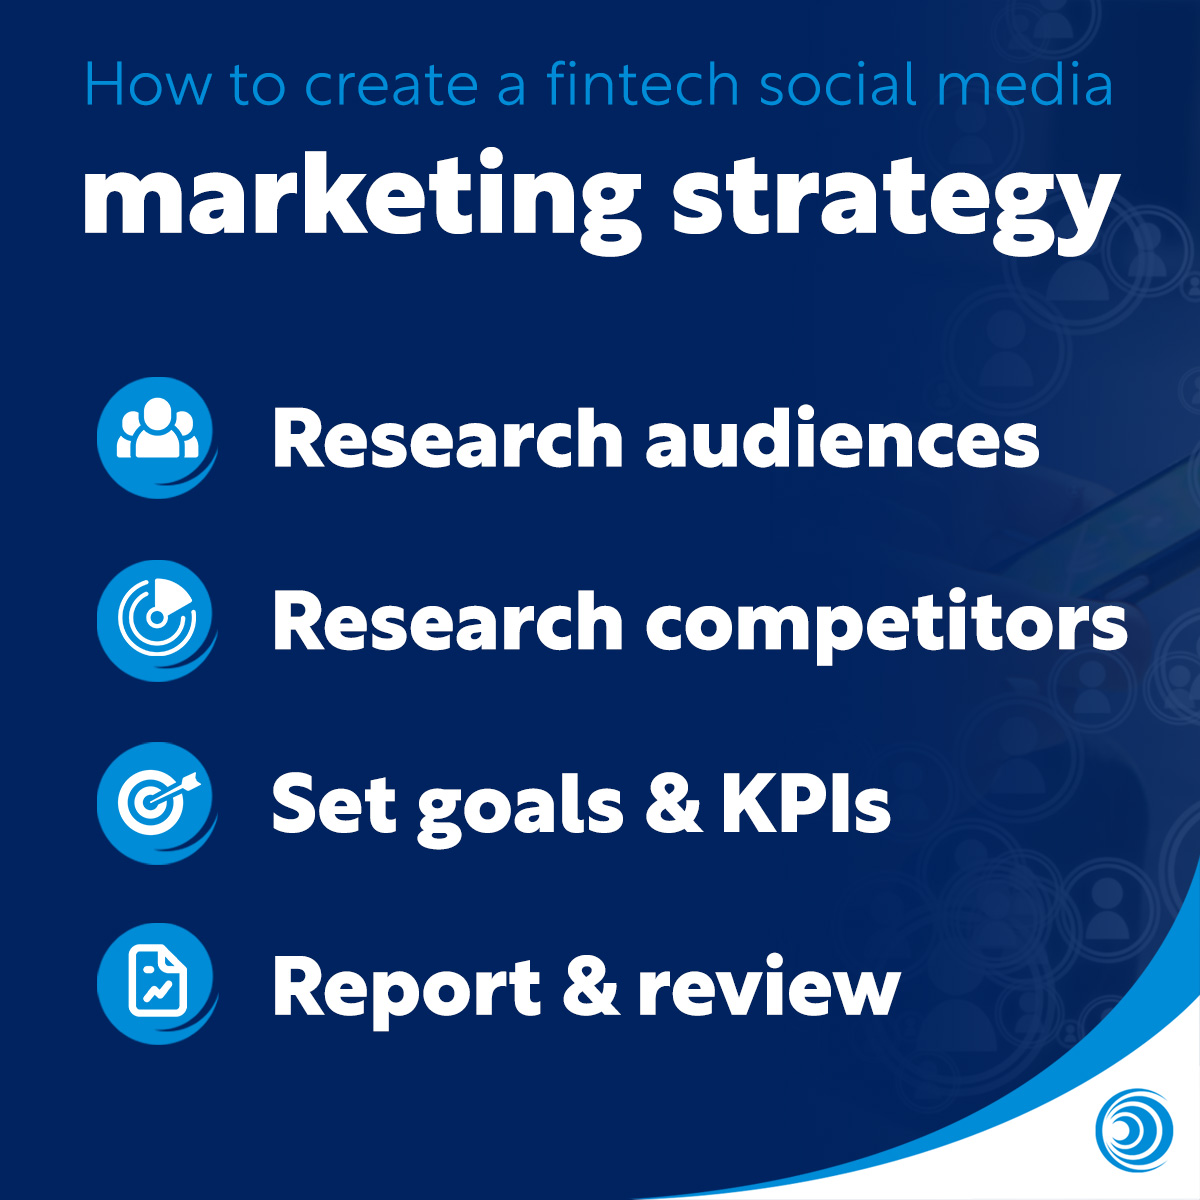 How to create a fintech SMM Strategy Blog Template Infographic 2 copy